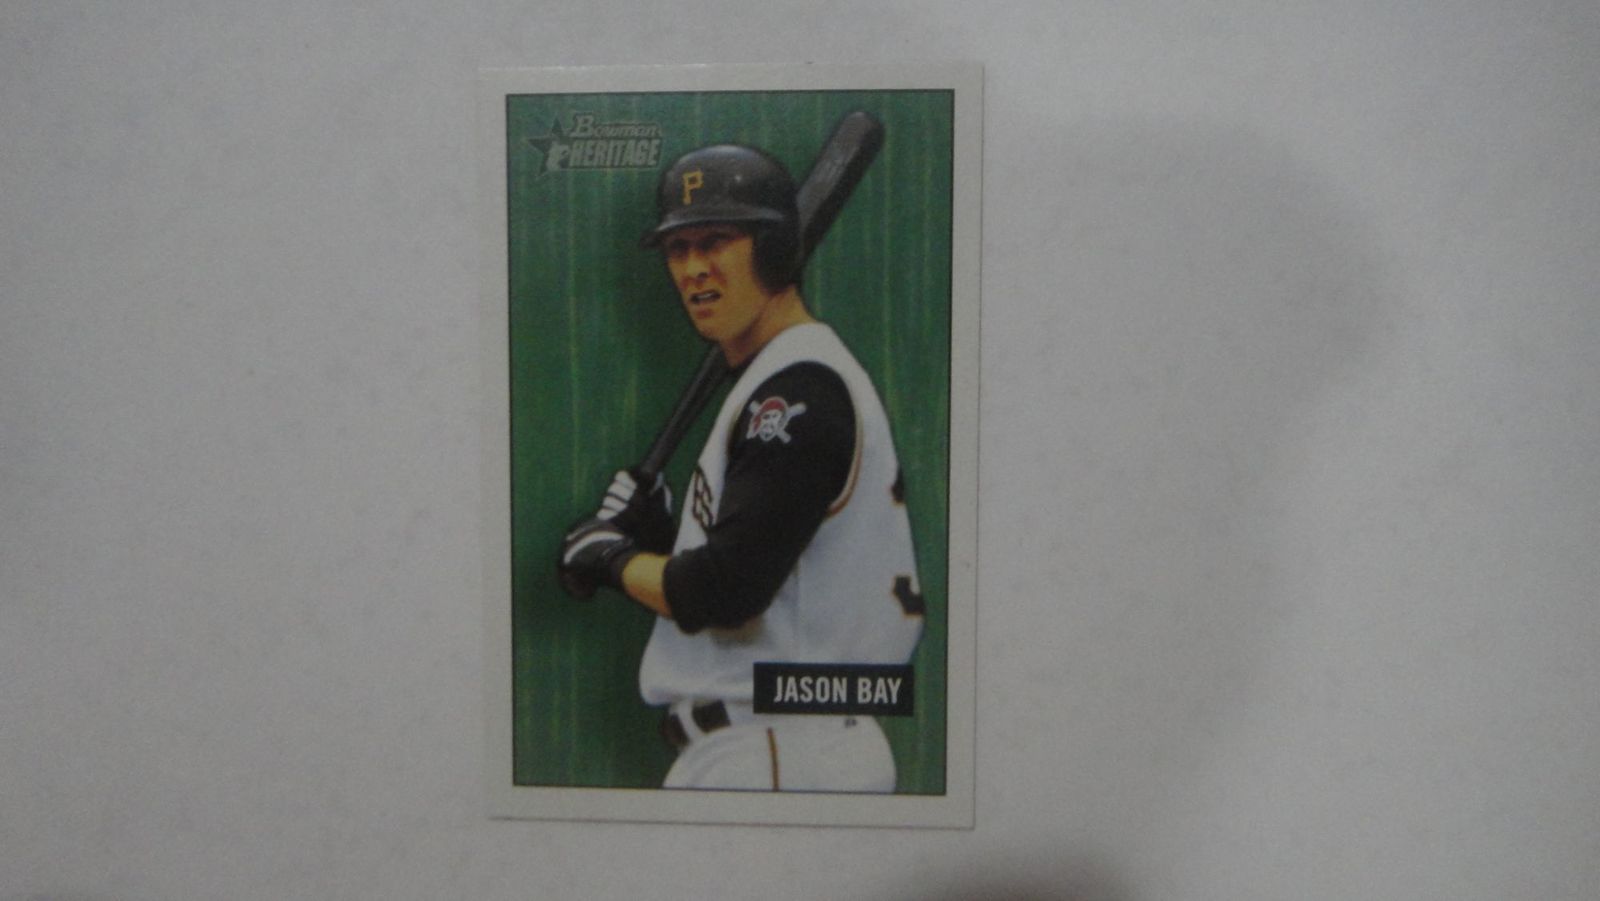 Primary image for  Jason Bay Mini card, 2005 Bowman Heritage. LooK!